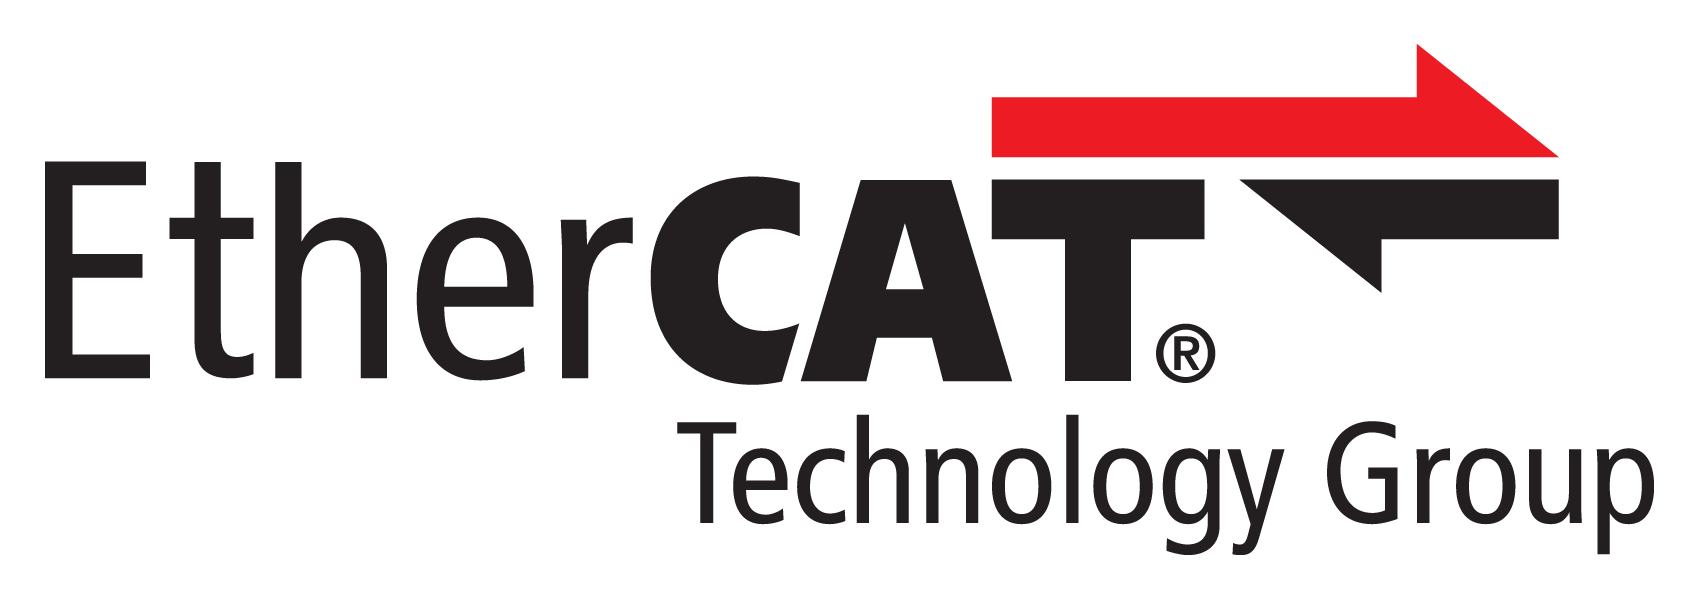 PAGE 2 ENTRY FORM FOR ETHERCAT PRODUCT GUIDE 